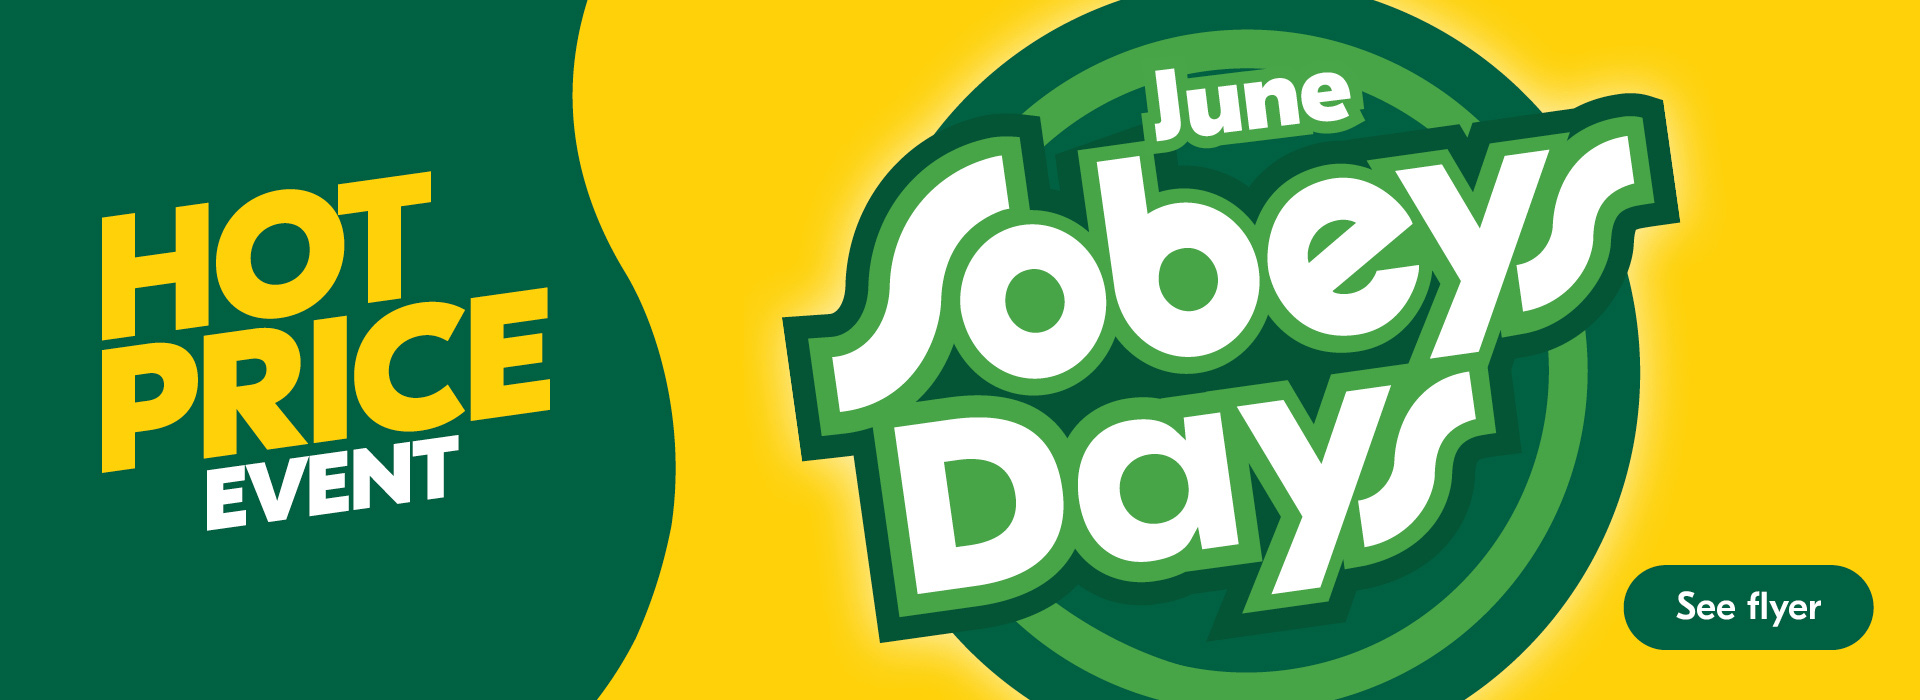 Hot Price Event June Sobeys Days